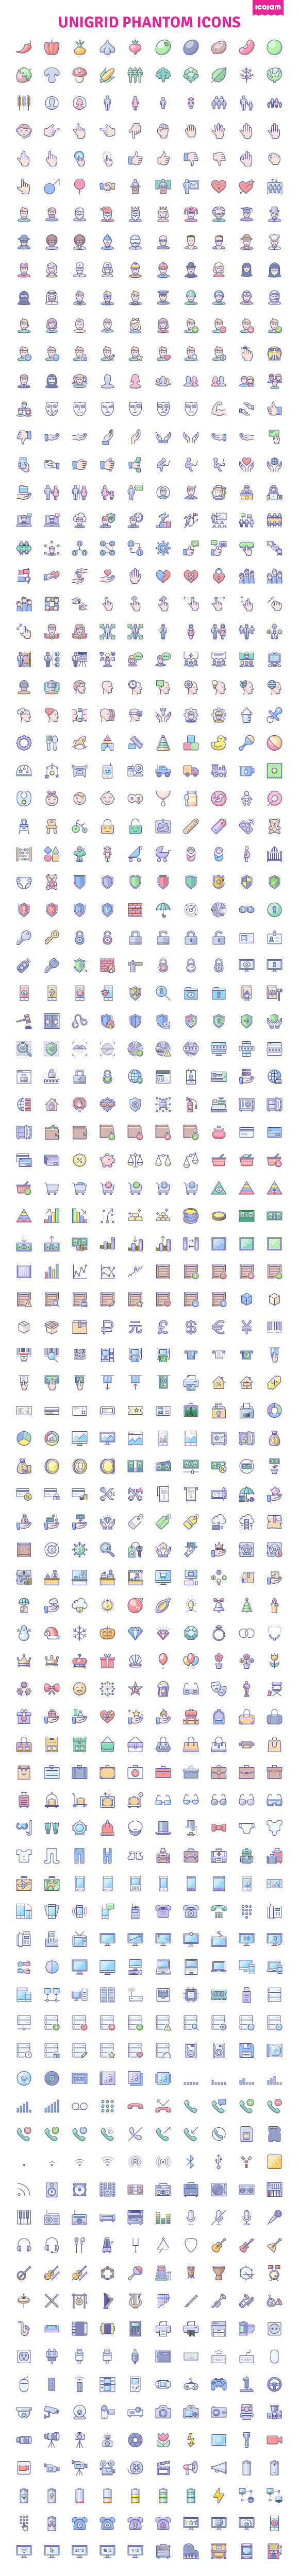 3000 Unigrid Phantom icons in Communication Icons - product preview 2